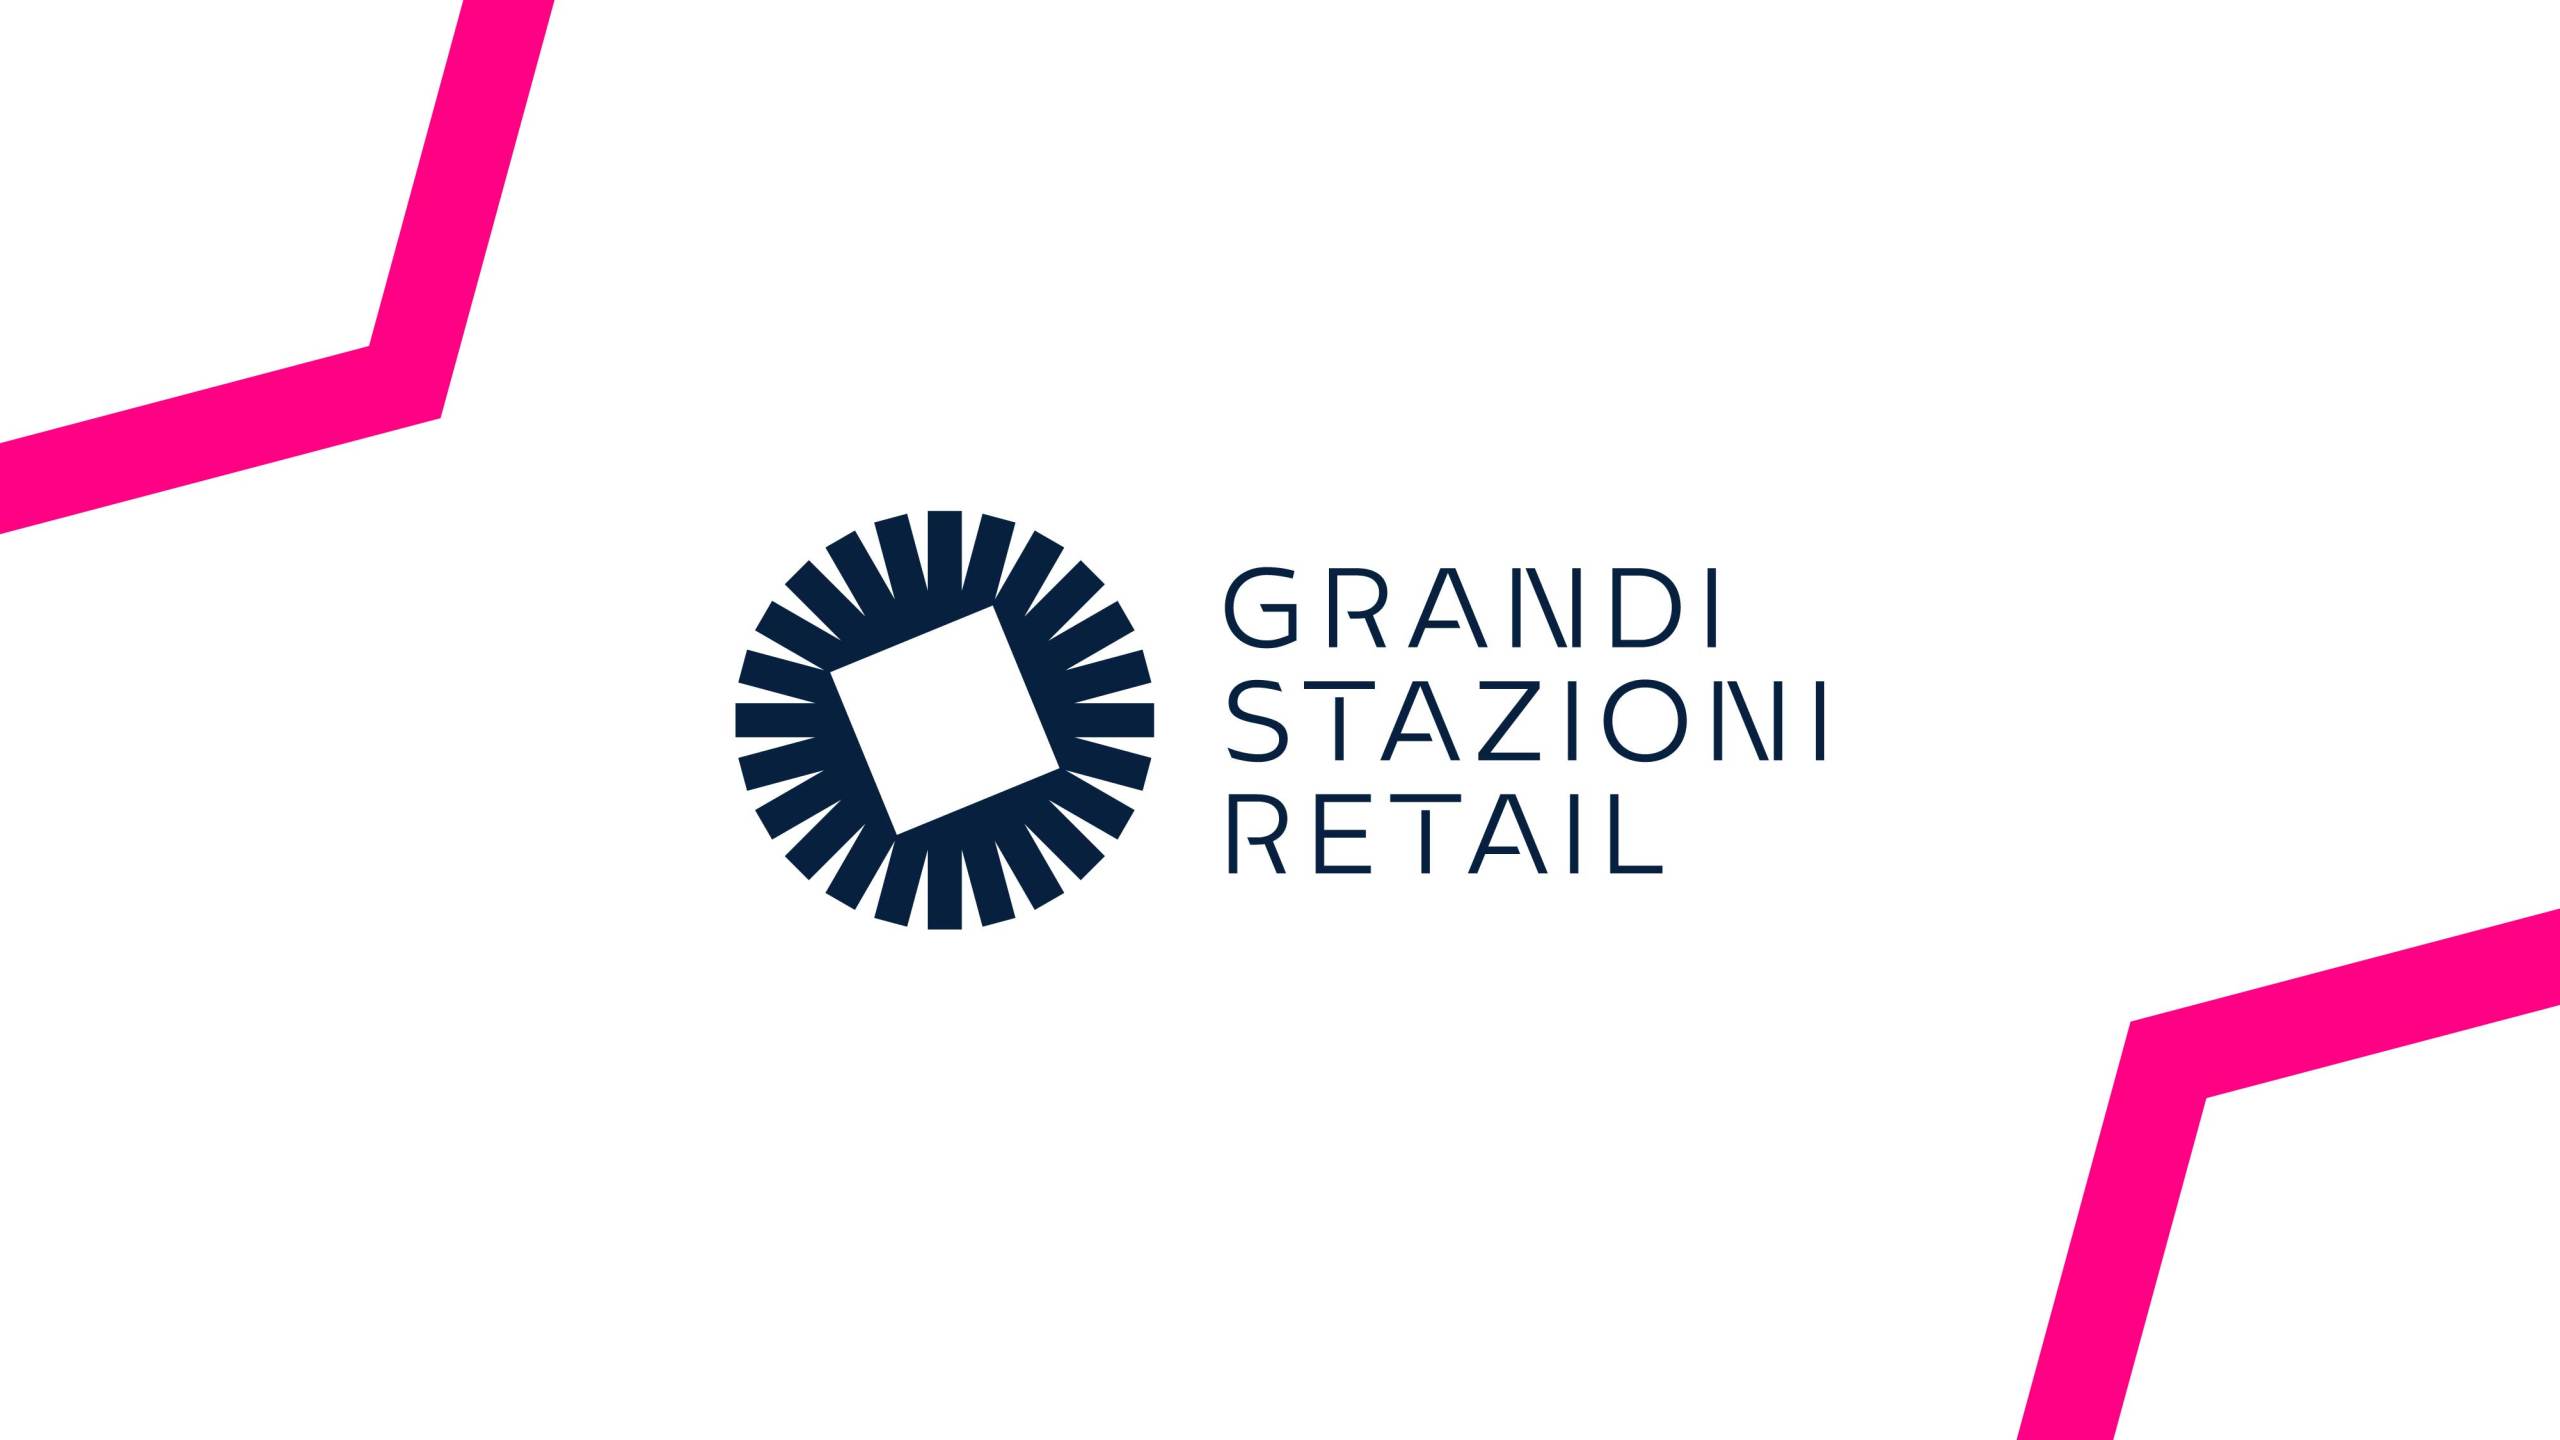 Partnership with Grandi Stazioni Retail, Italy’s leading digital out of home (DOOH) advertising media network, secures Hivestack’s position as largest Supply Side Platform (SSP) in Italy